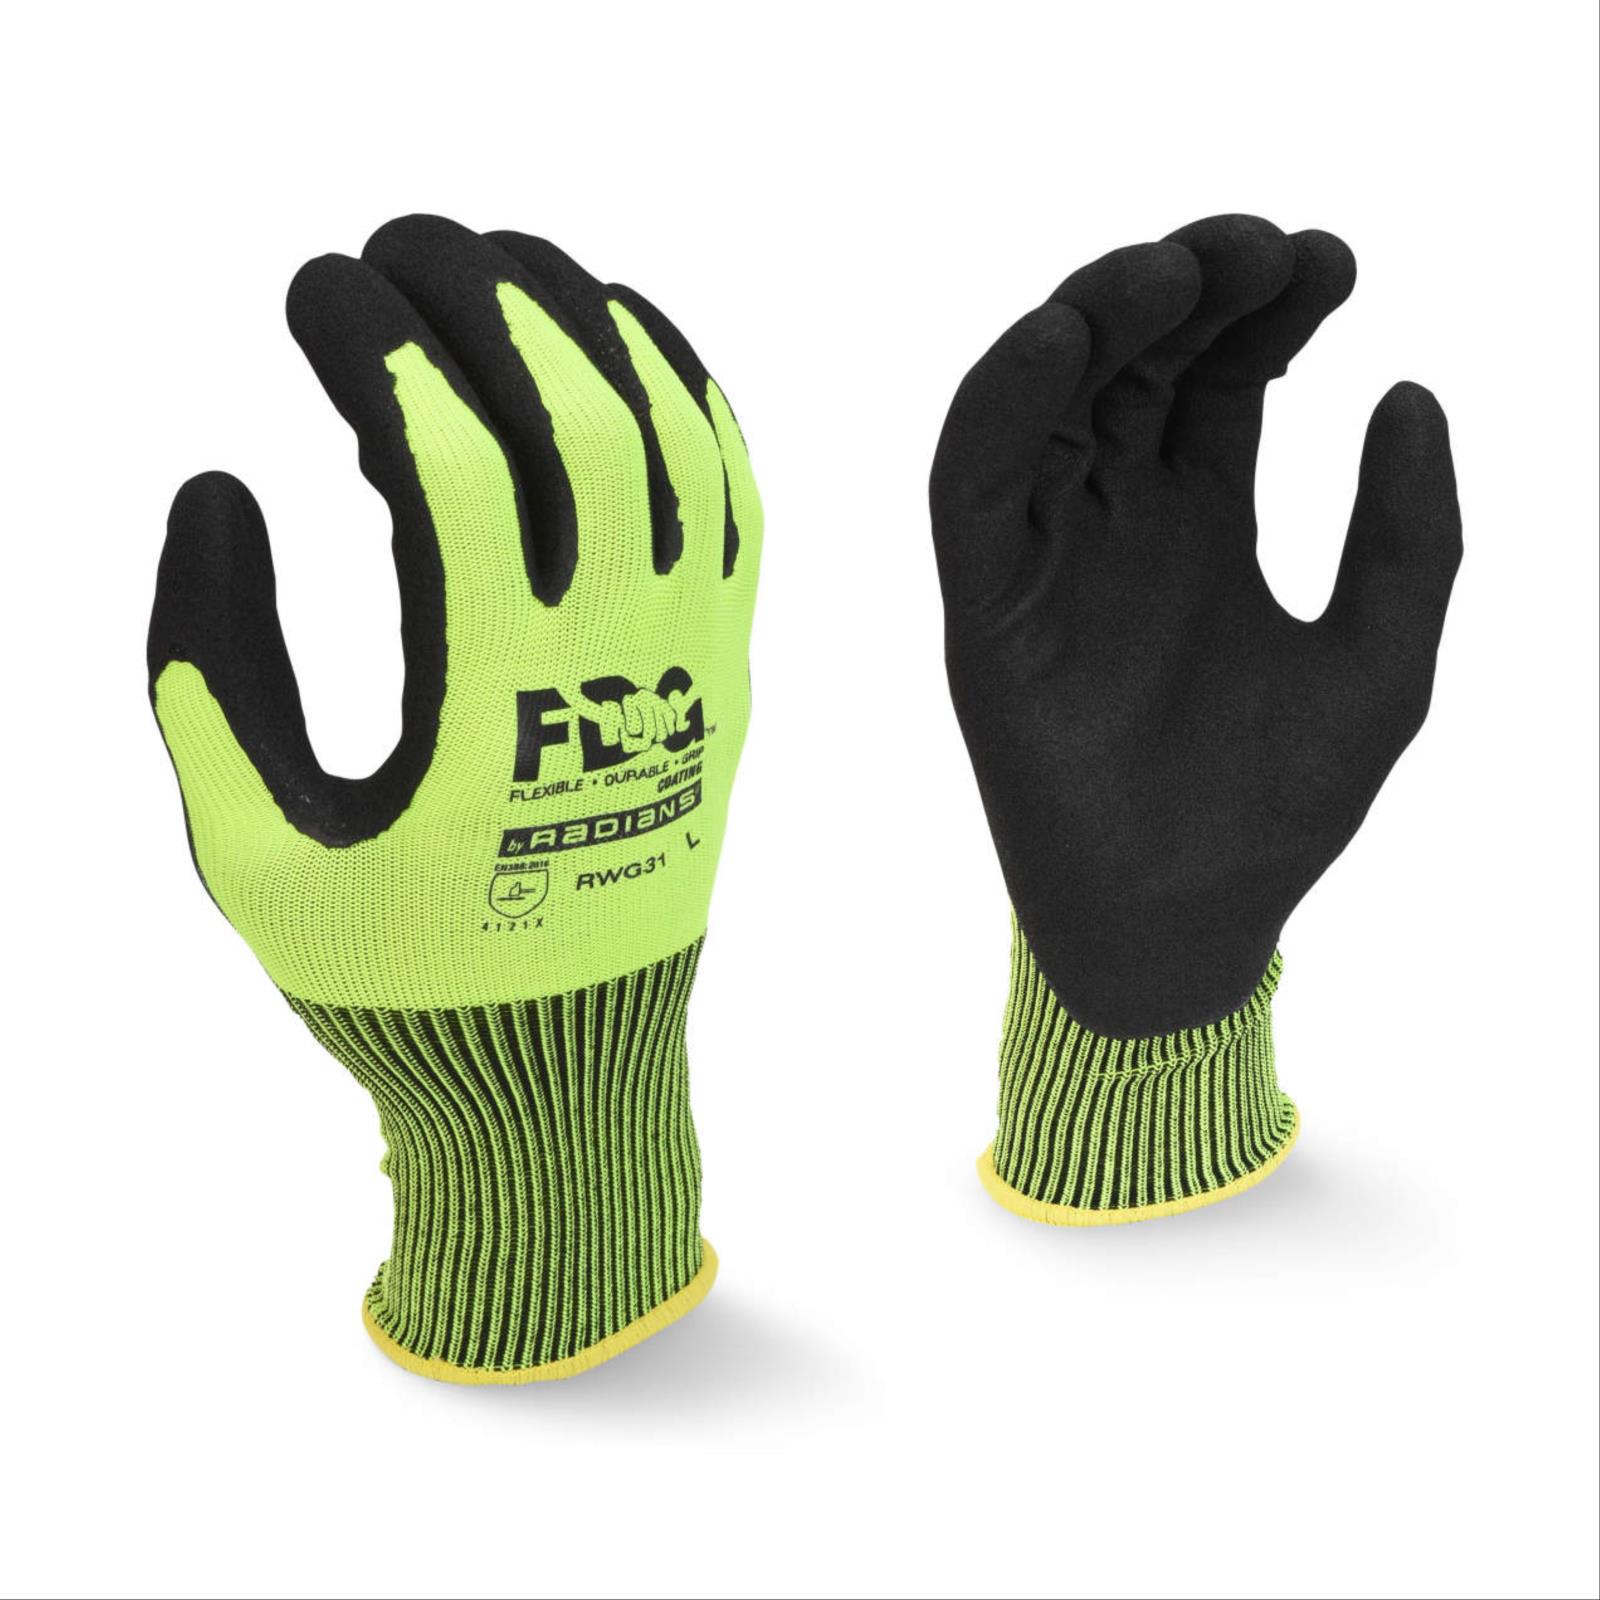 Safety Products Inc - FDG Coated High Visibility Work Glove